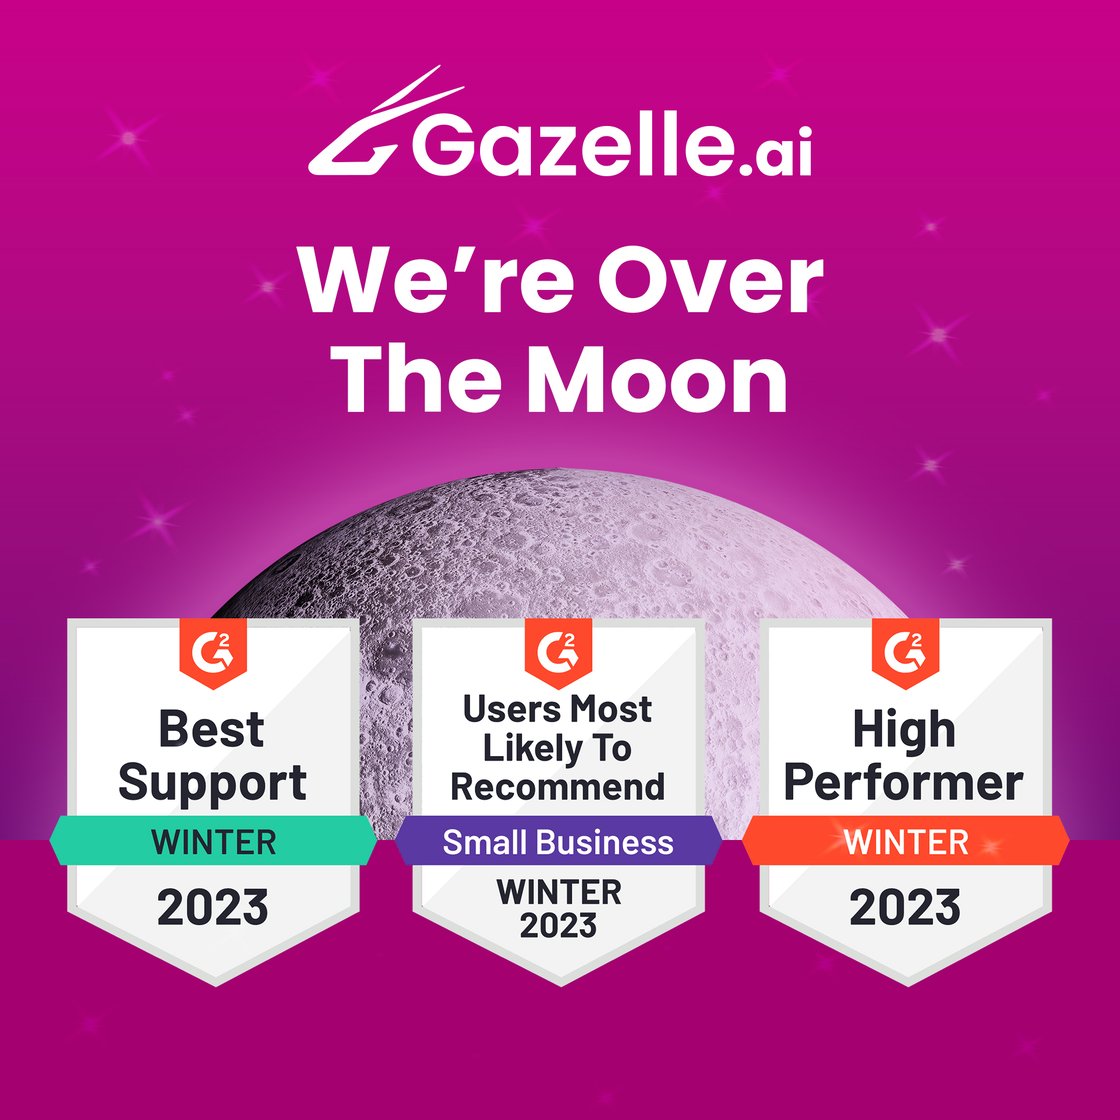 We're Over the Moon!